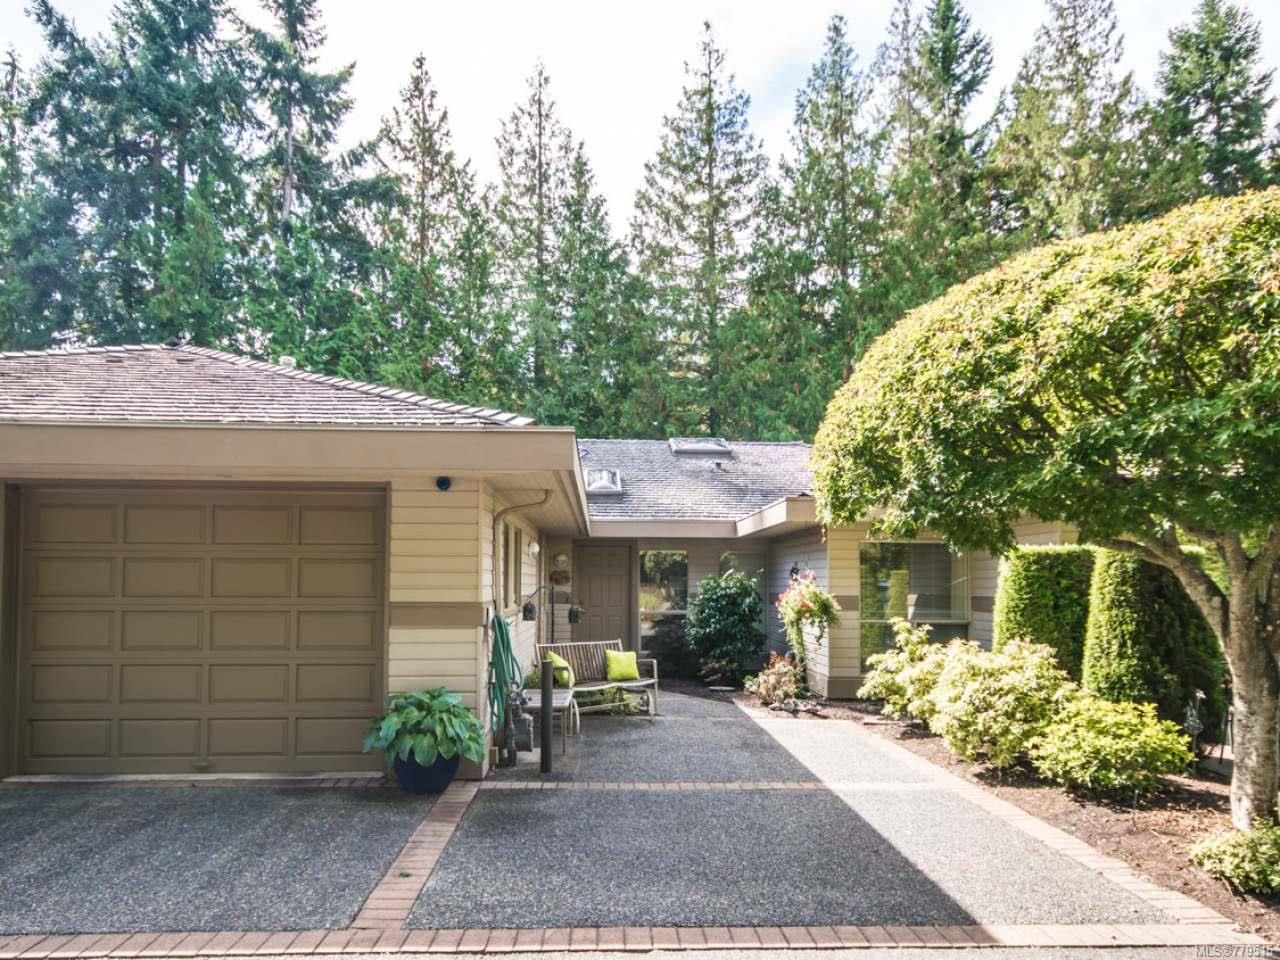 Main Photo: 1196 LEE ROAD in FRENCH CREEK: PQ French Creek Row/Townhouse for sale (Parksville/Qualicum)  : MLS®# 779515